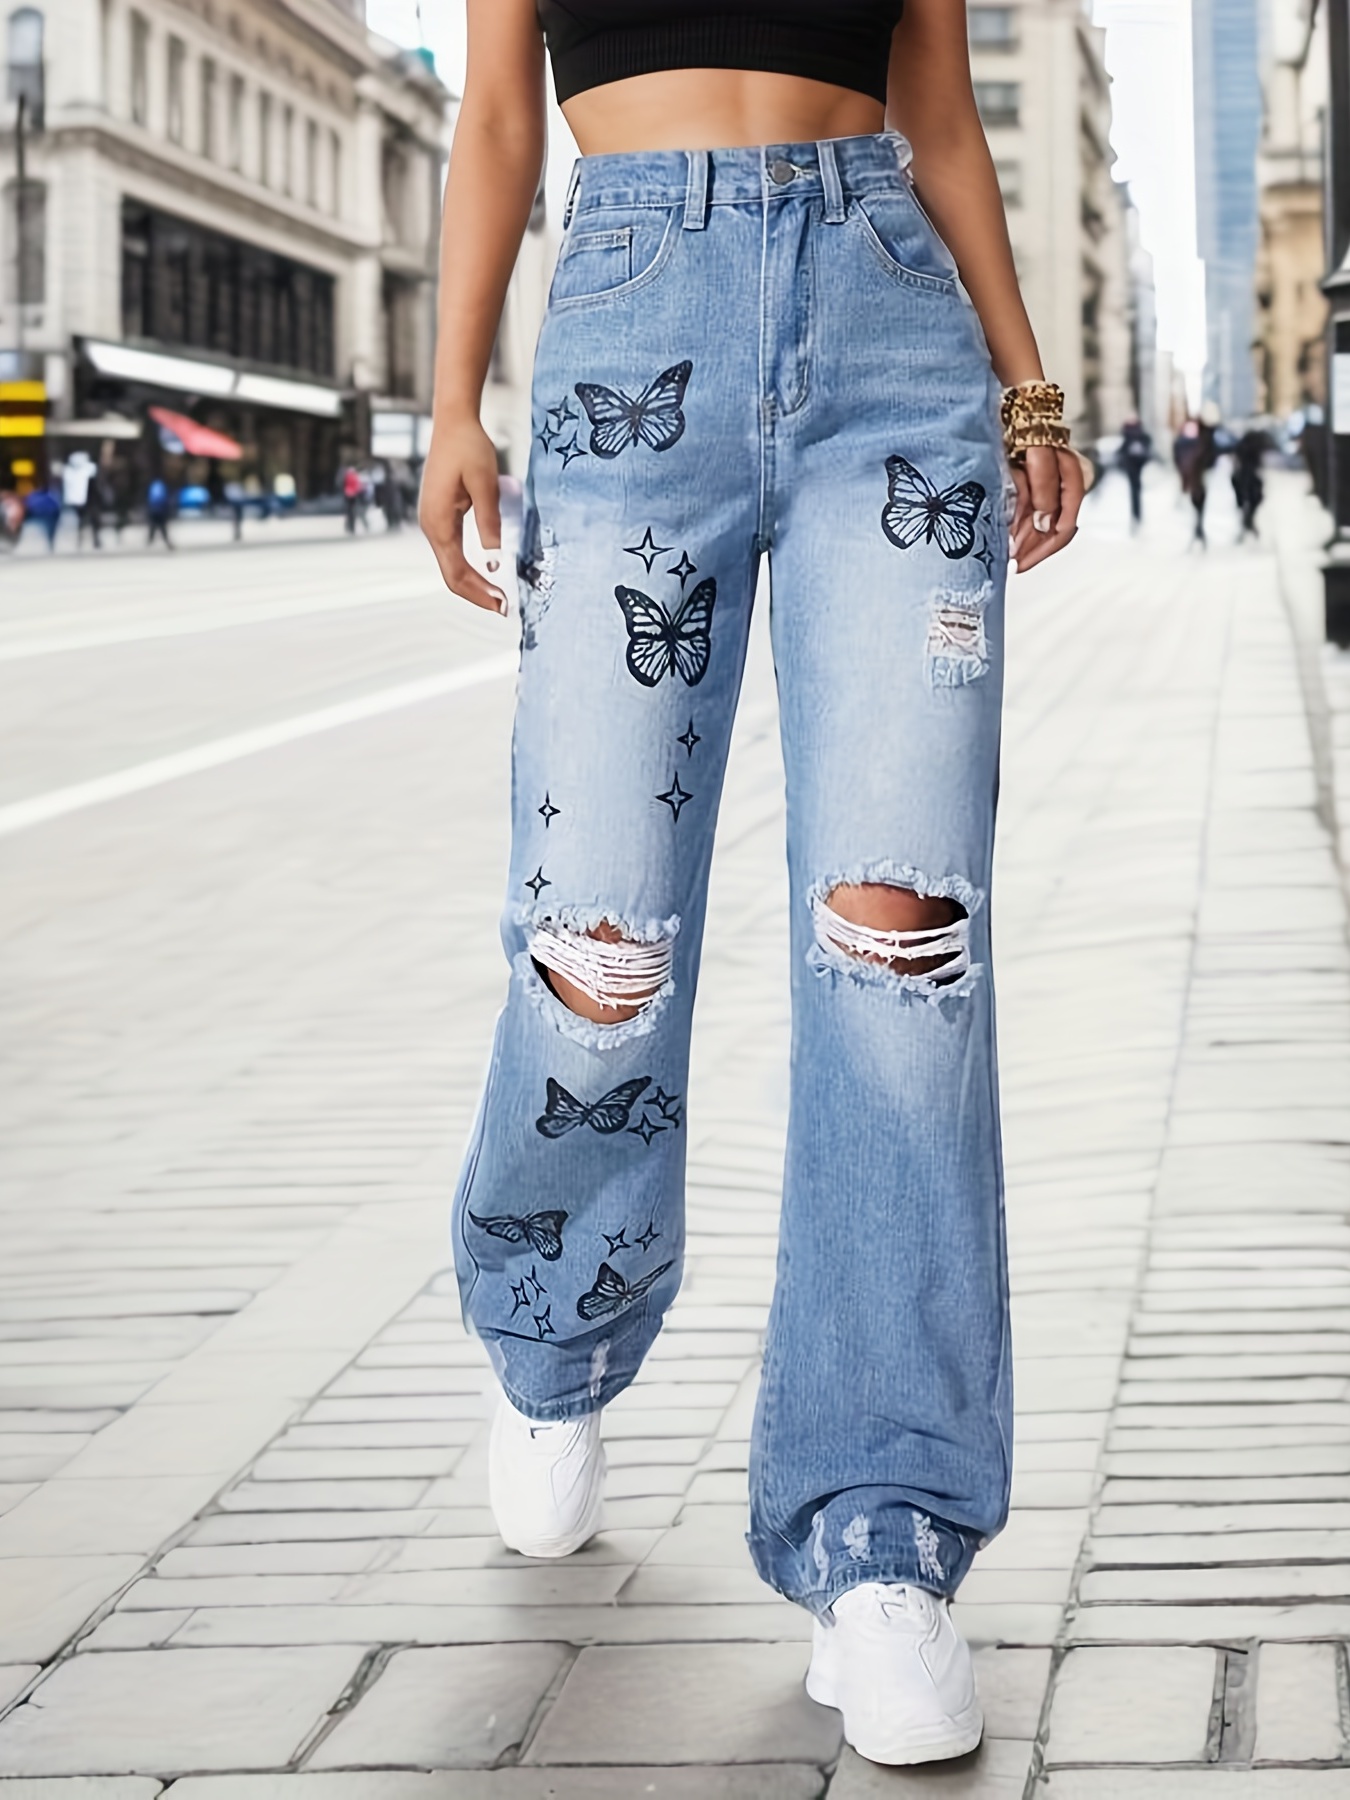 Grey Ripped Holes Straight Jeans, Non-Stretch Distressed Loose Fit Street  Style Denim Pants, Women's Denim Jeans & Clothing